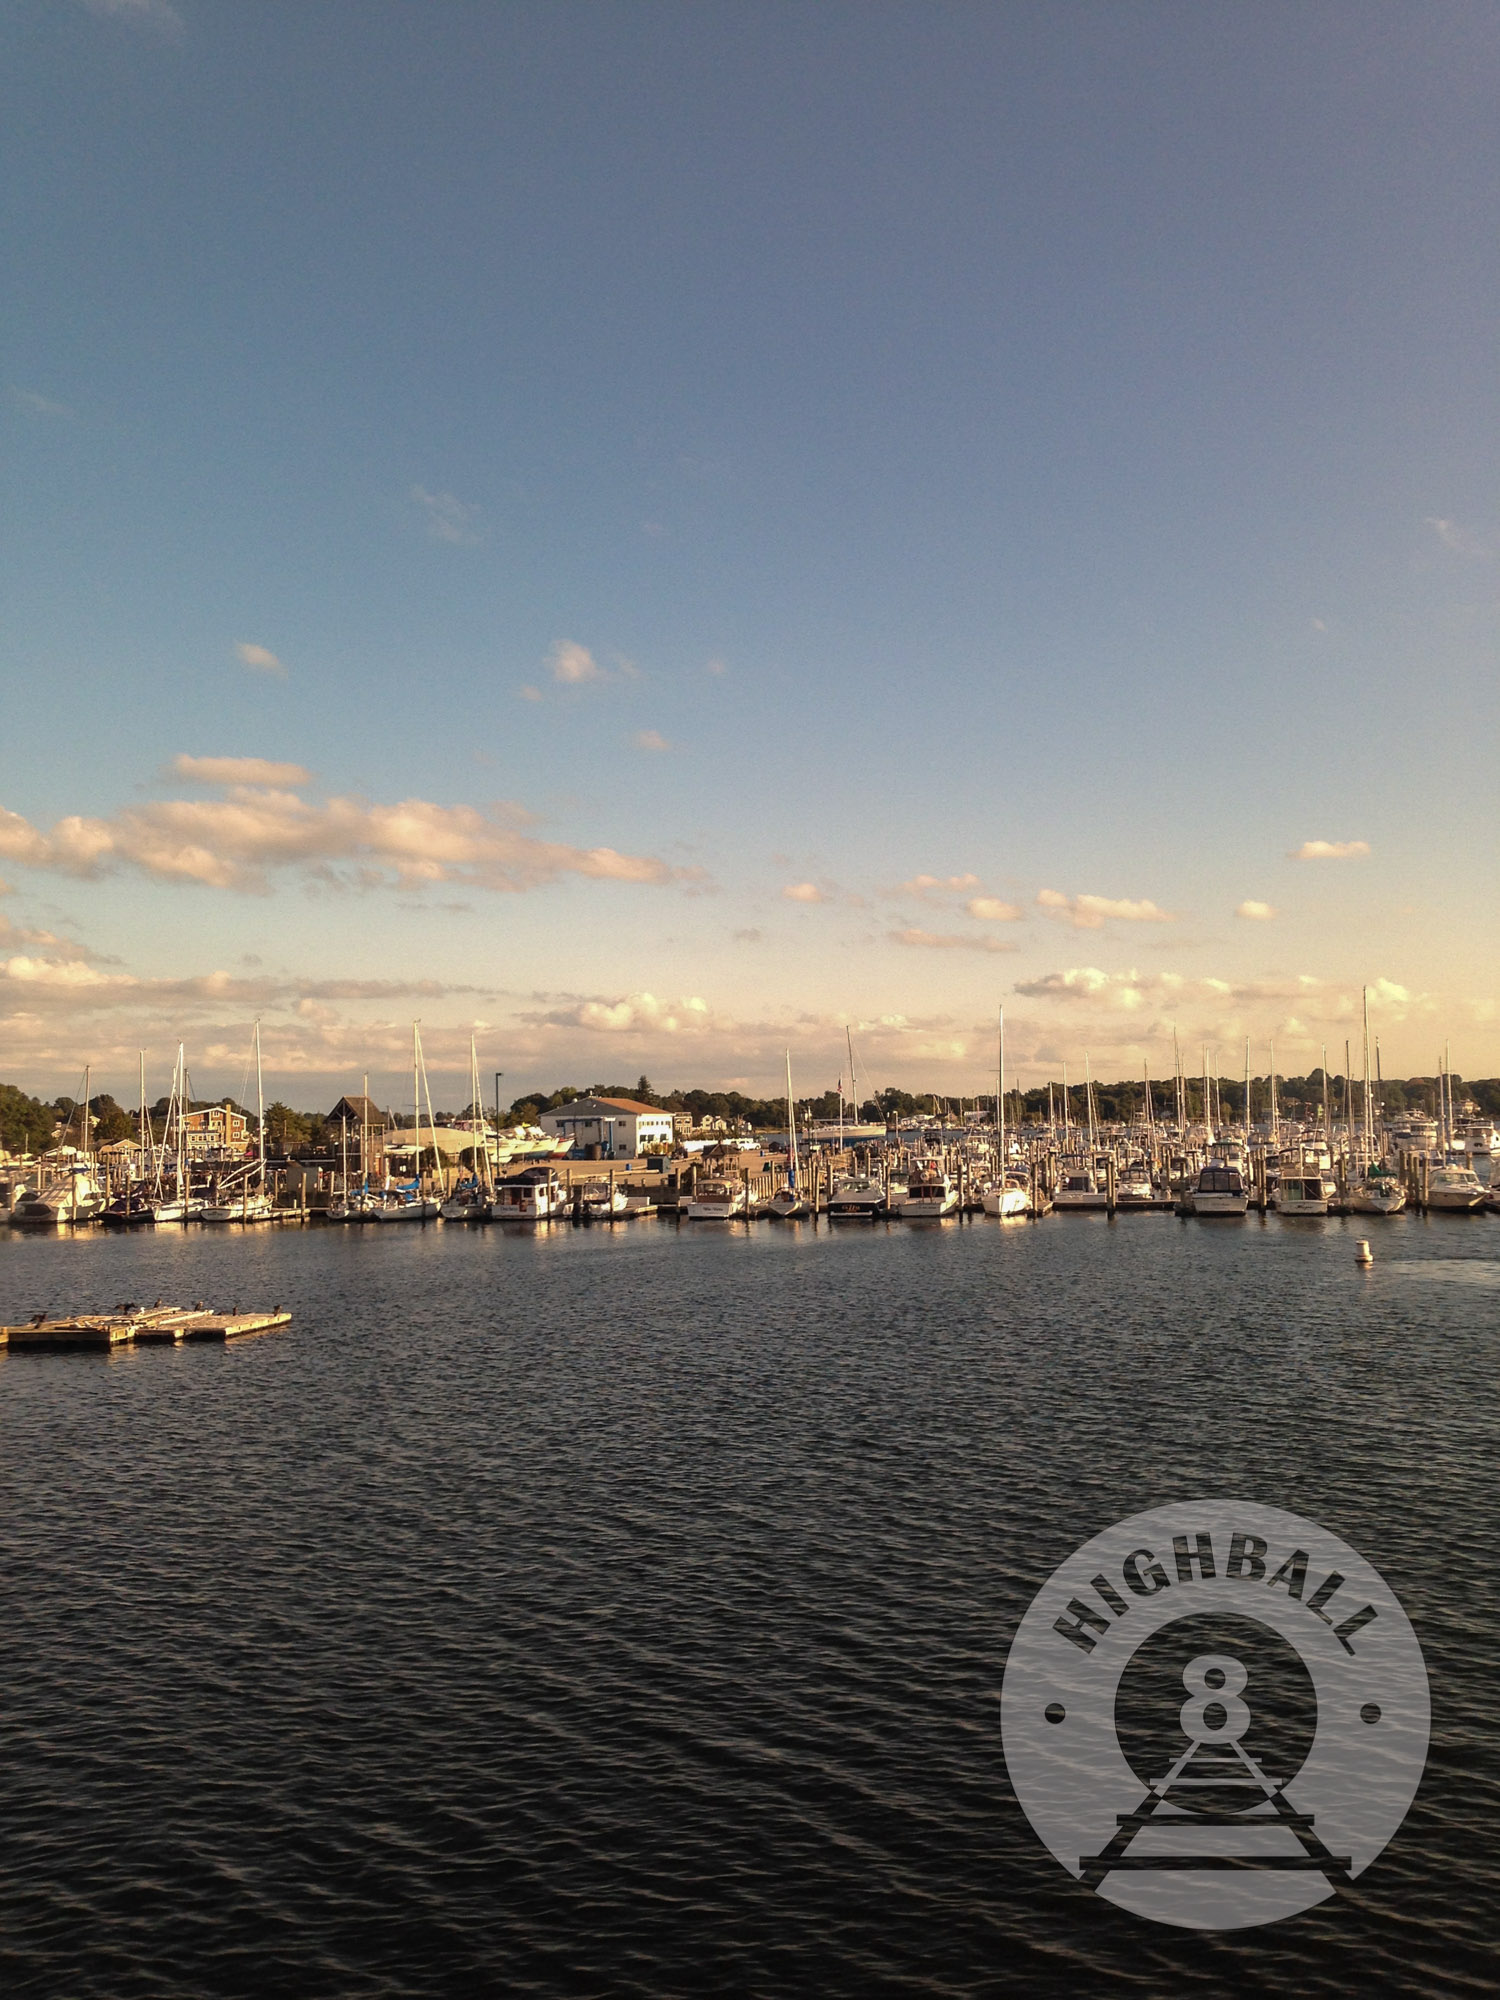 Marina in New London, Connecticut, USA, 2014, as seen from Amtrak.